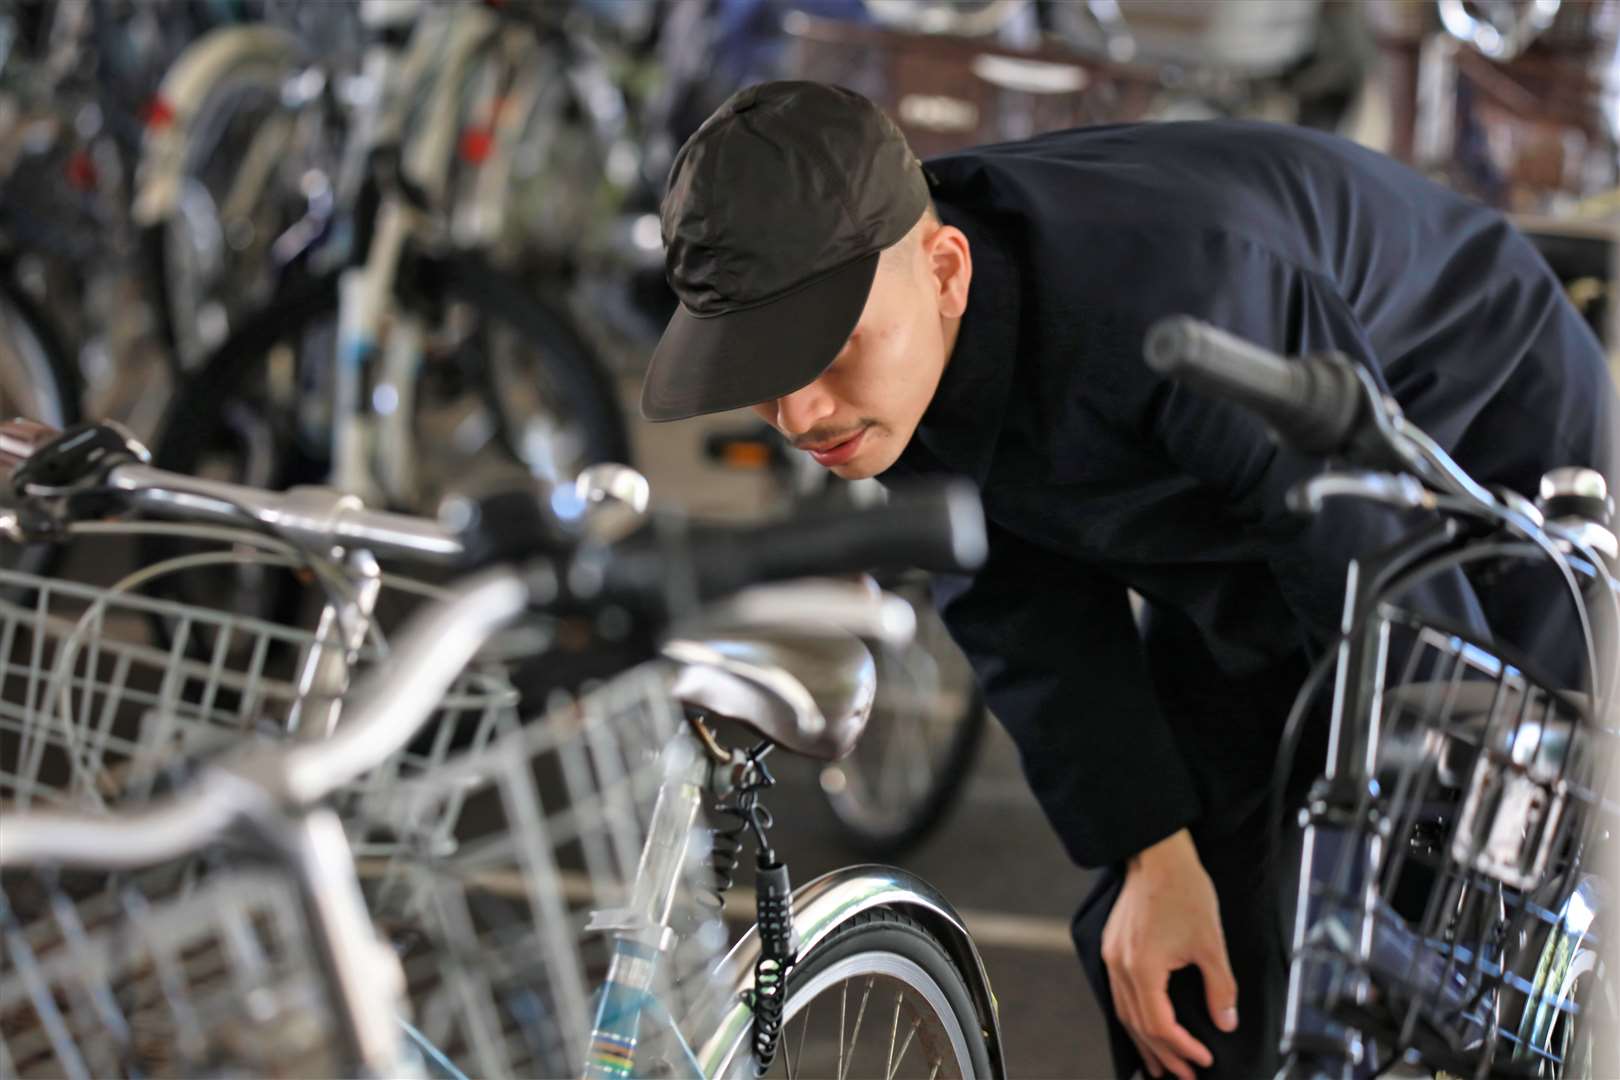 Police warn about bike theft and say it is on the rise.